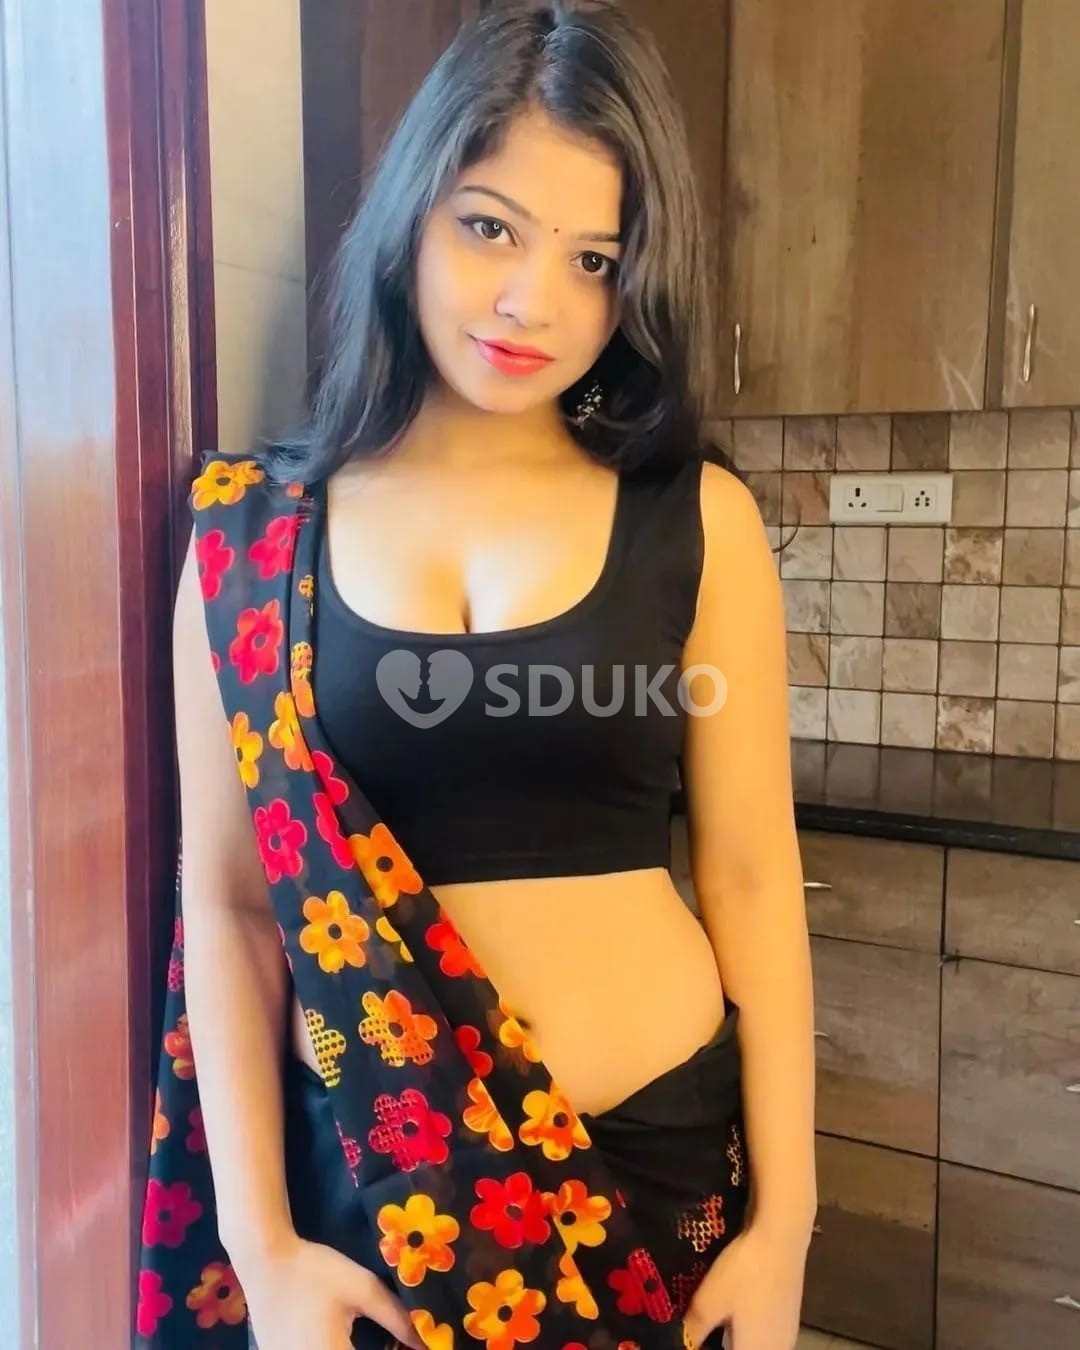 Dwarka  💯VIP girls Low price 100% genuinesexy VIP call girls are providedsafe and secure ser